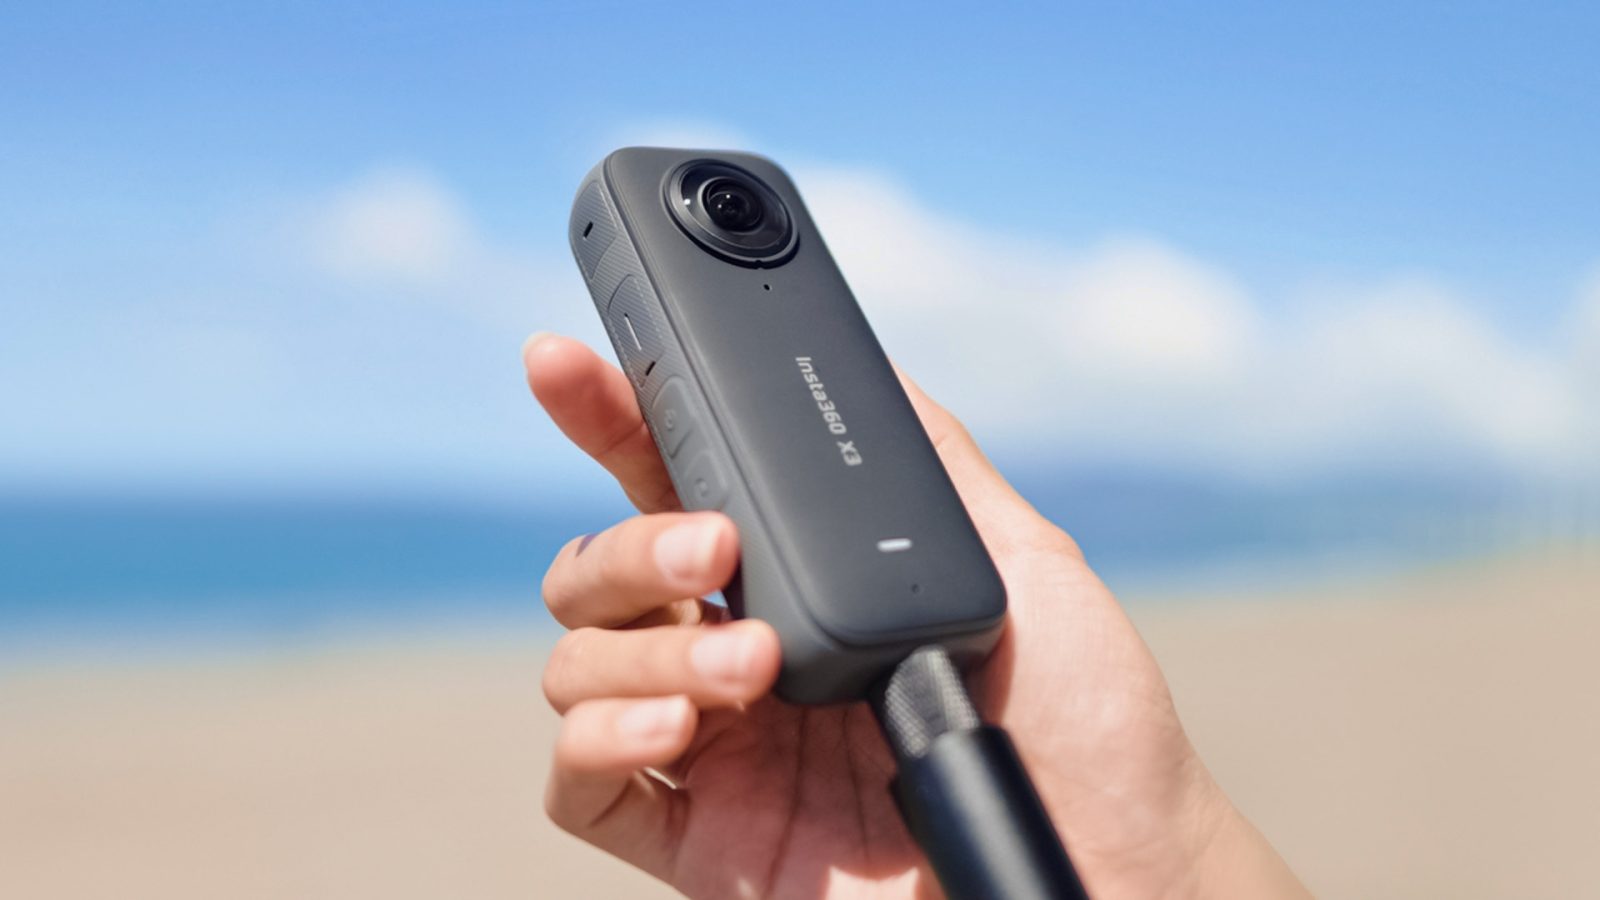 Insta360 X3 action camera now available for sale in Apple Stores with special 'Apple Bundle'